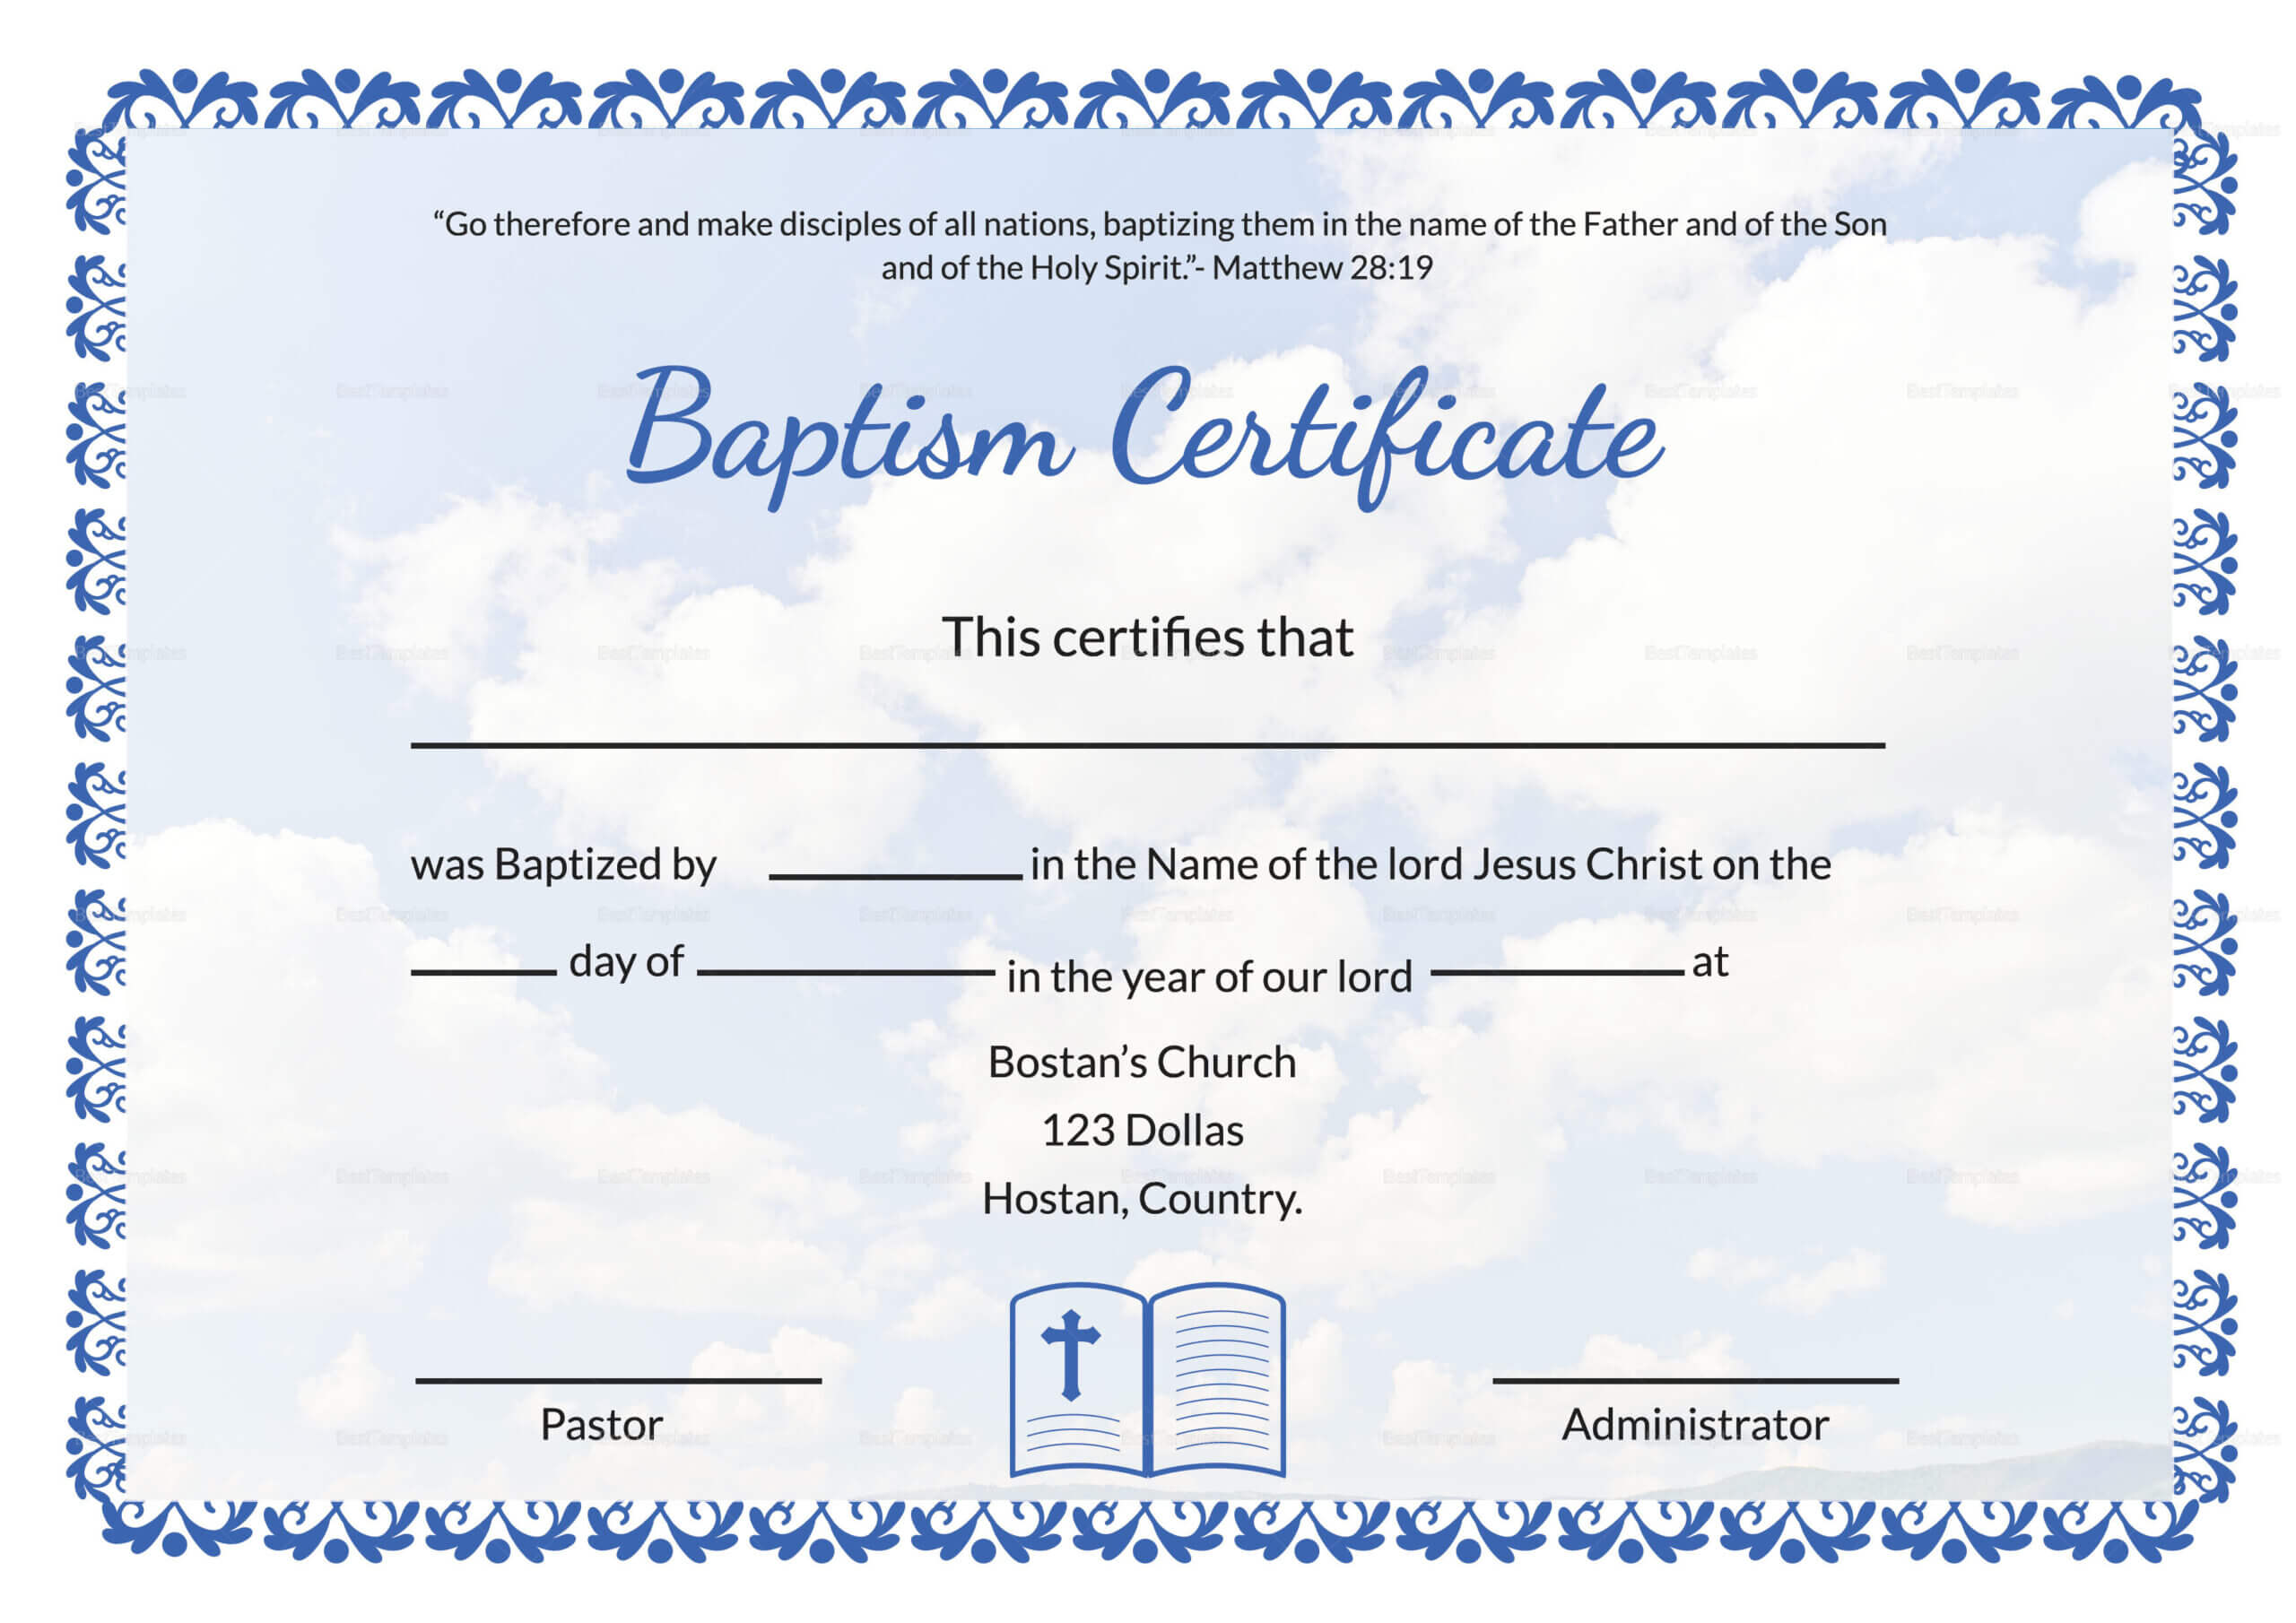 007 Certificate Of Baptism Template Ideas Unique Broadman With Regard To Christian Baptism Certificate Template